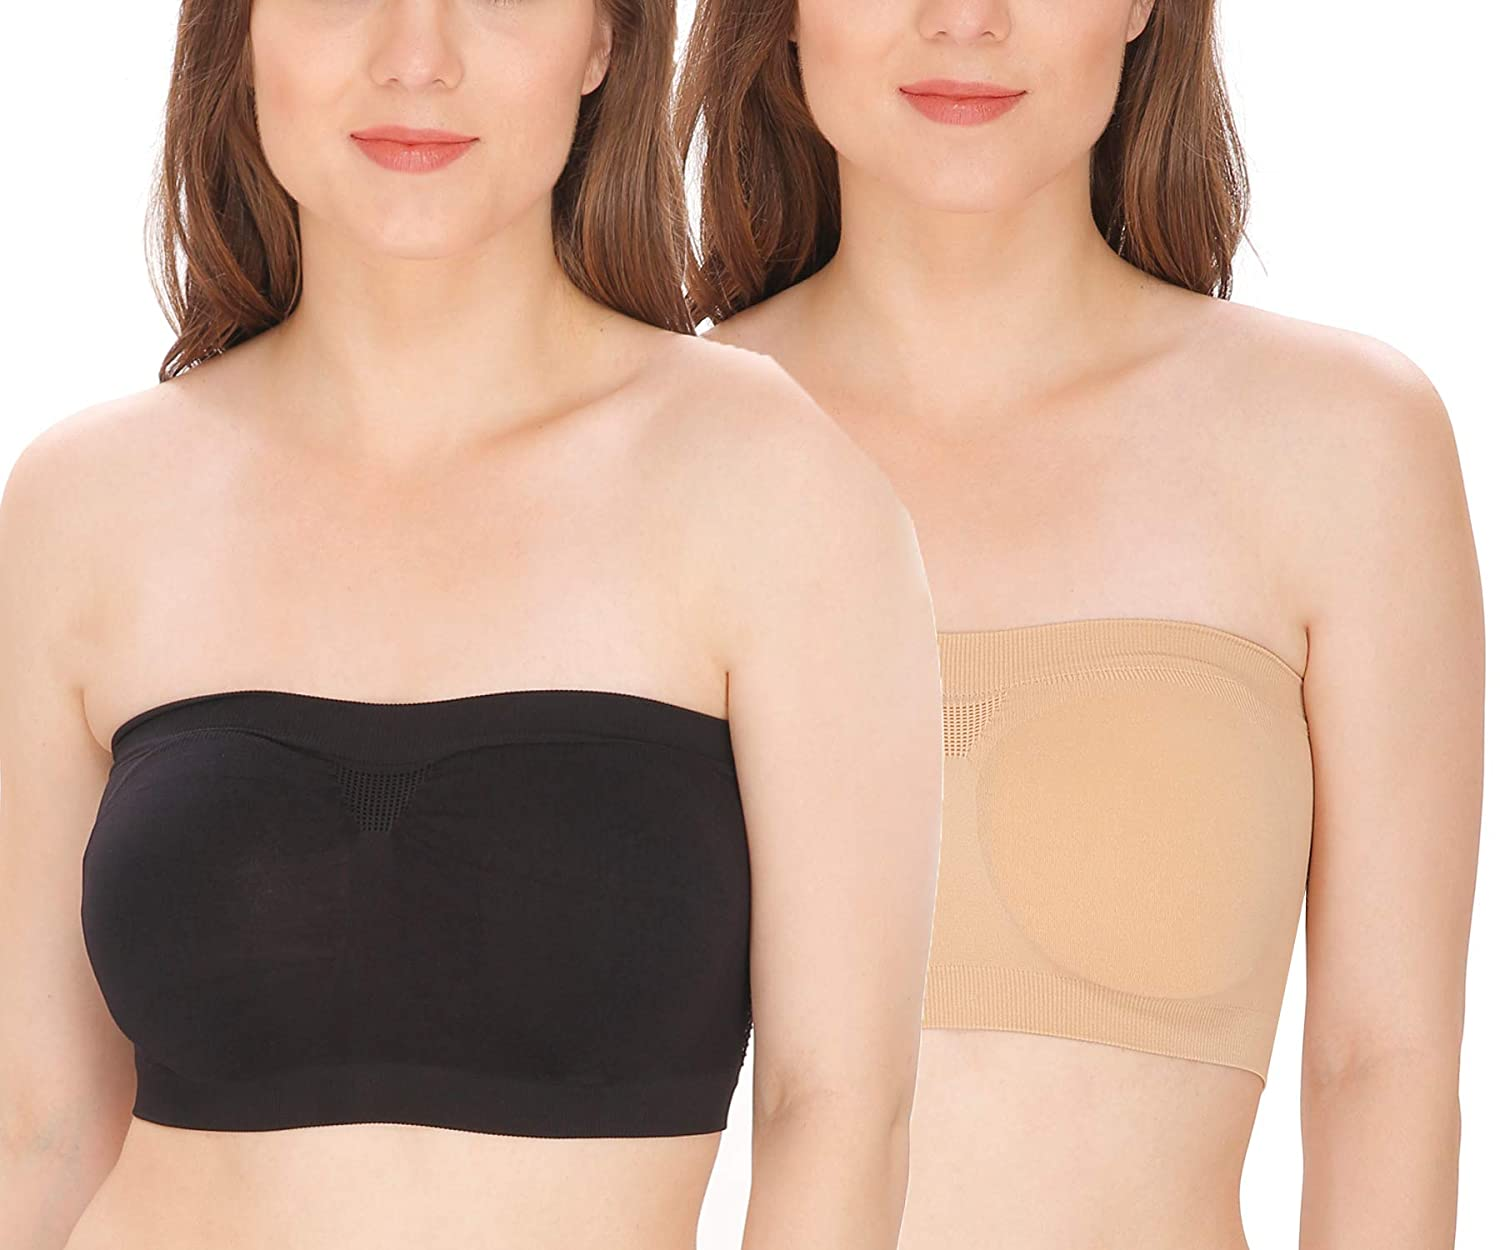 Padded non-wired bandeau bra